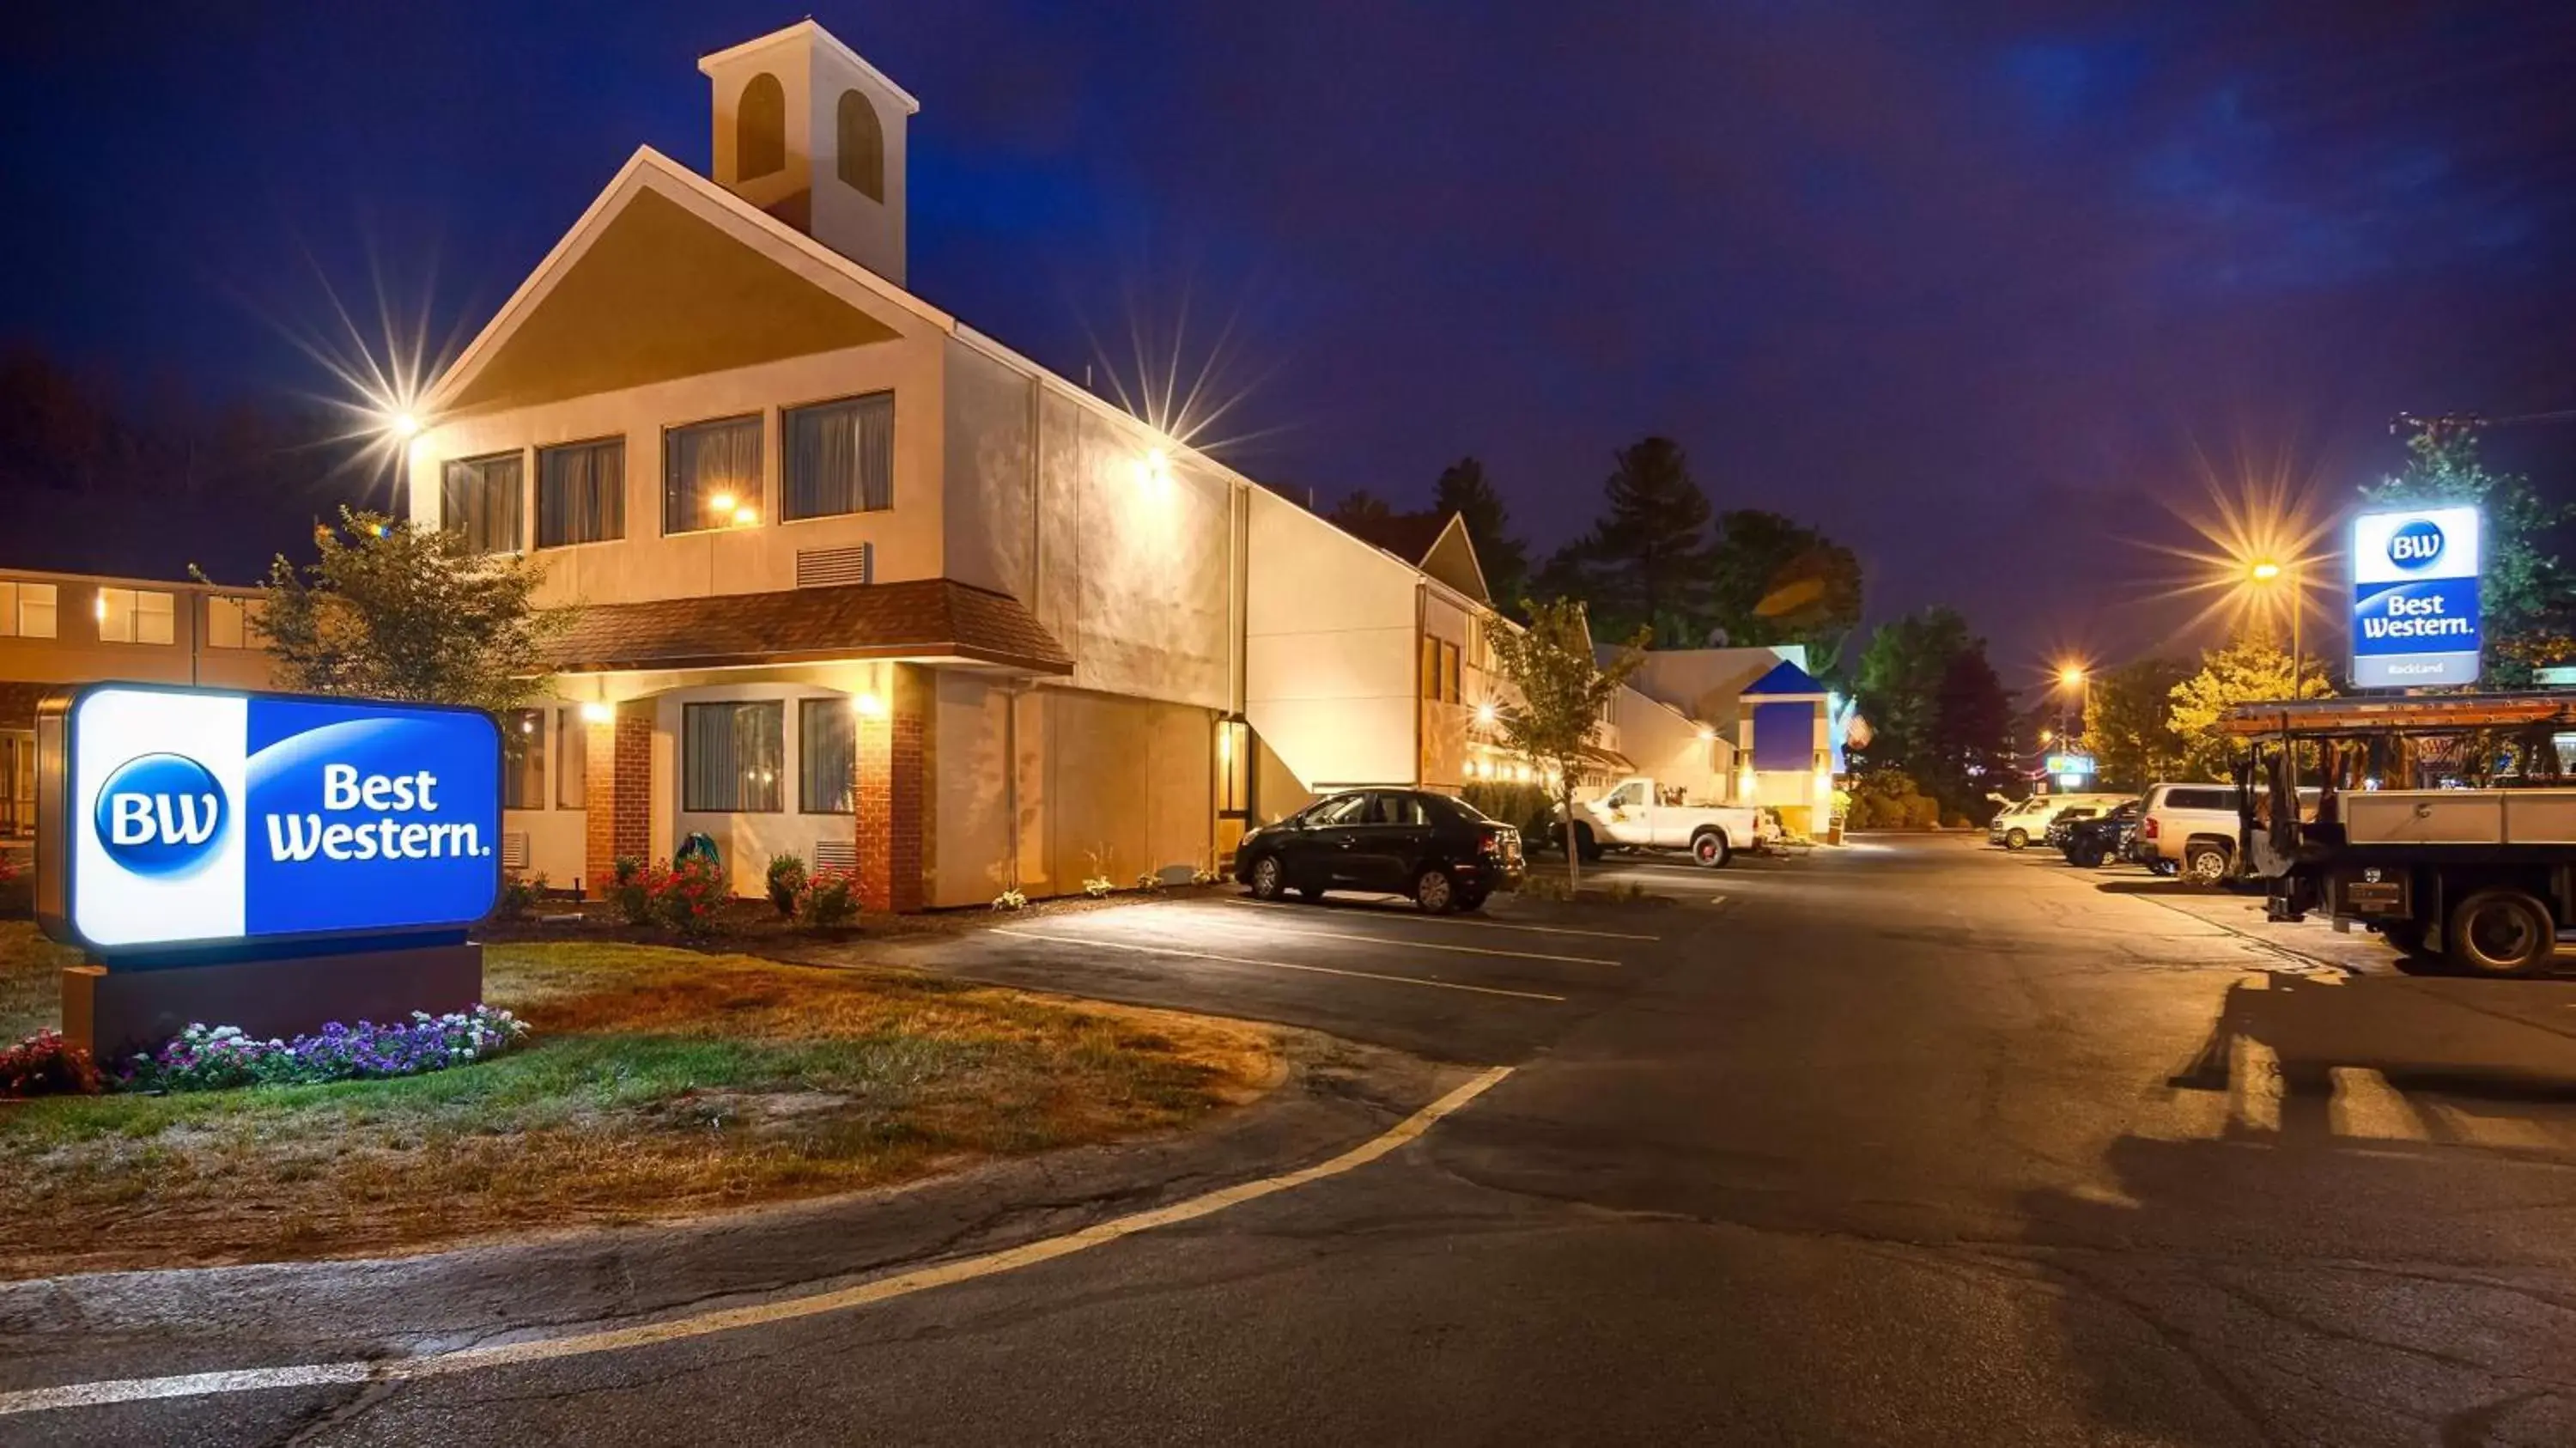 Property building in Best Western Rockland